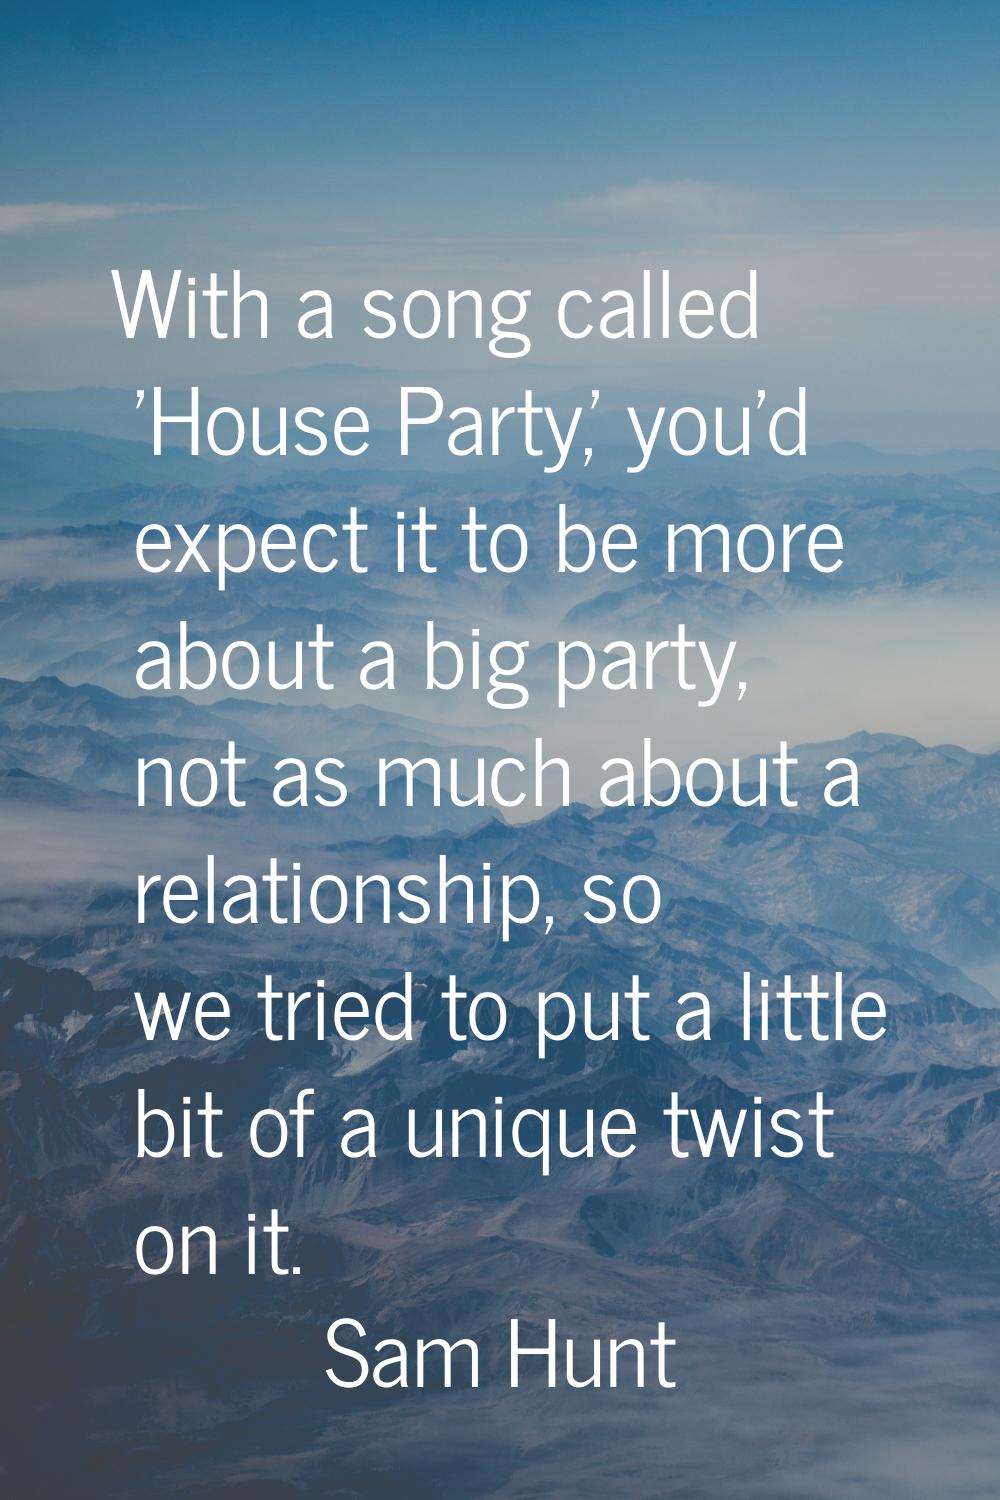 With a song called 'House Party,' you'd expect it to be more about a big party, not as much about a